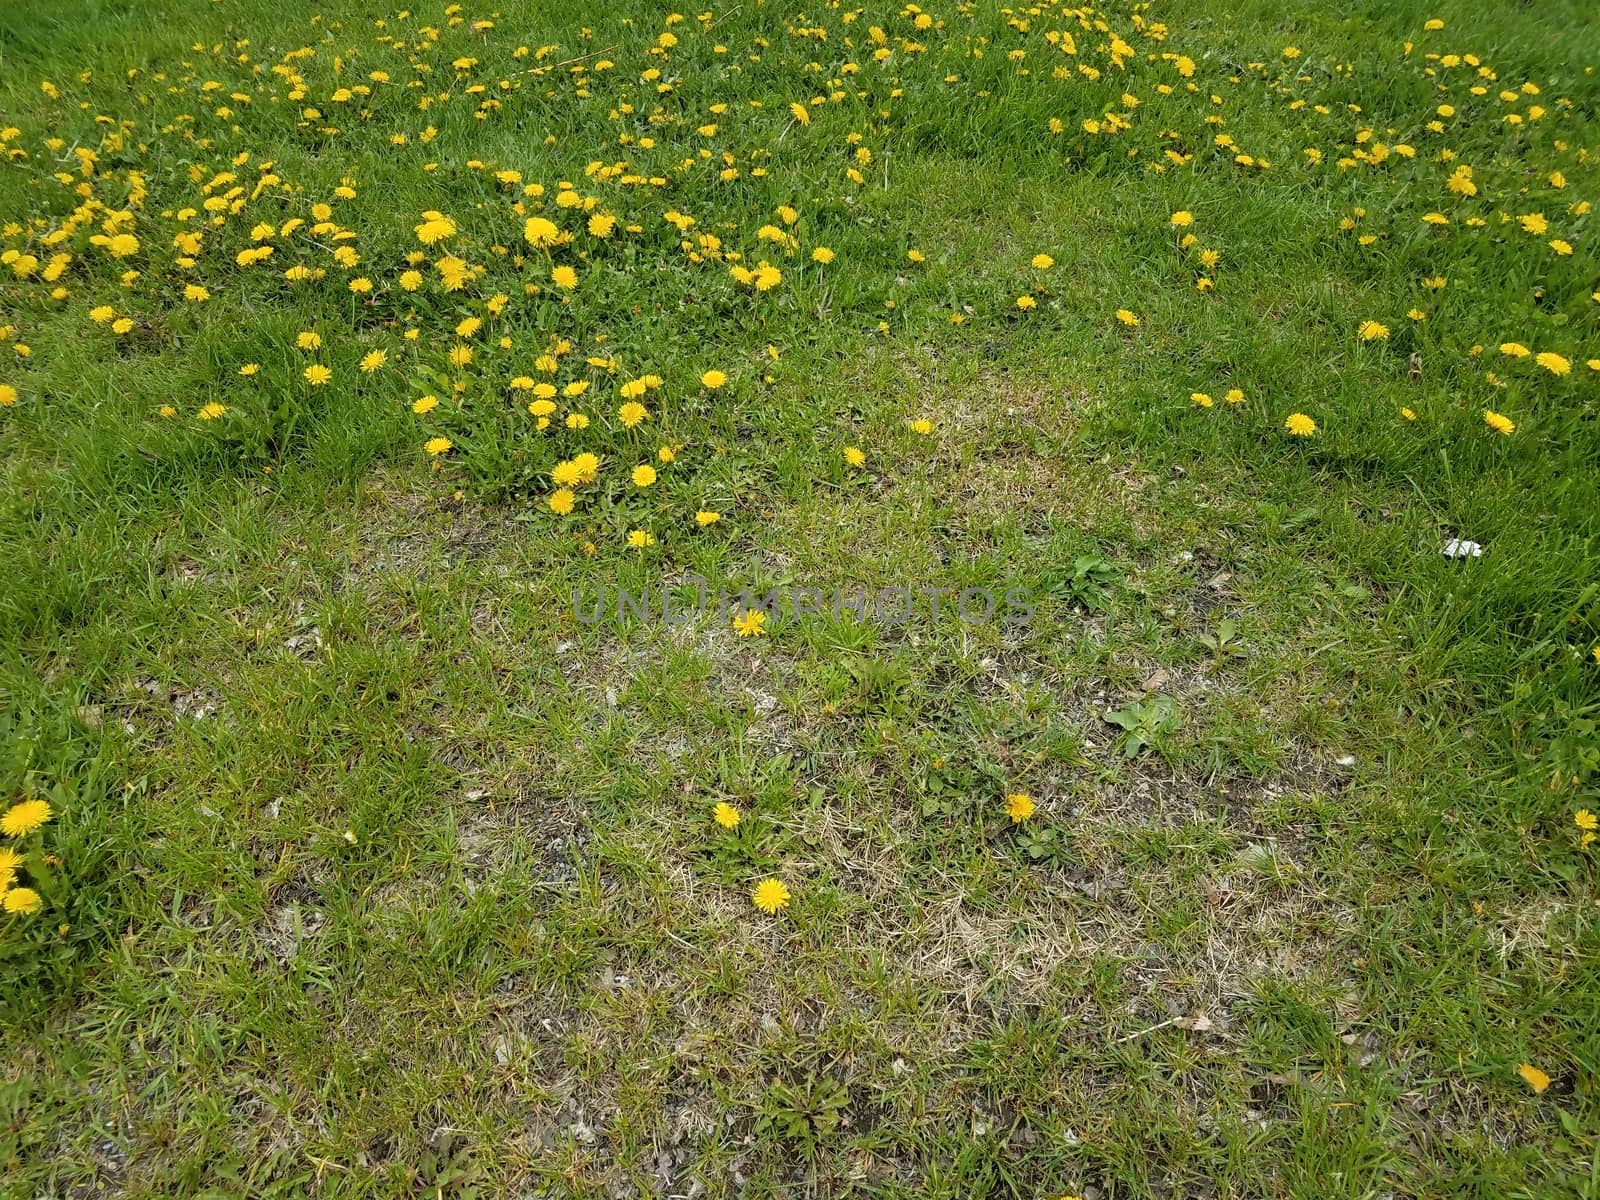 yellow dandelion weeds in green grass or lawn or yard